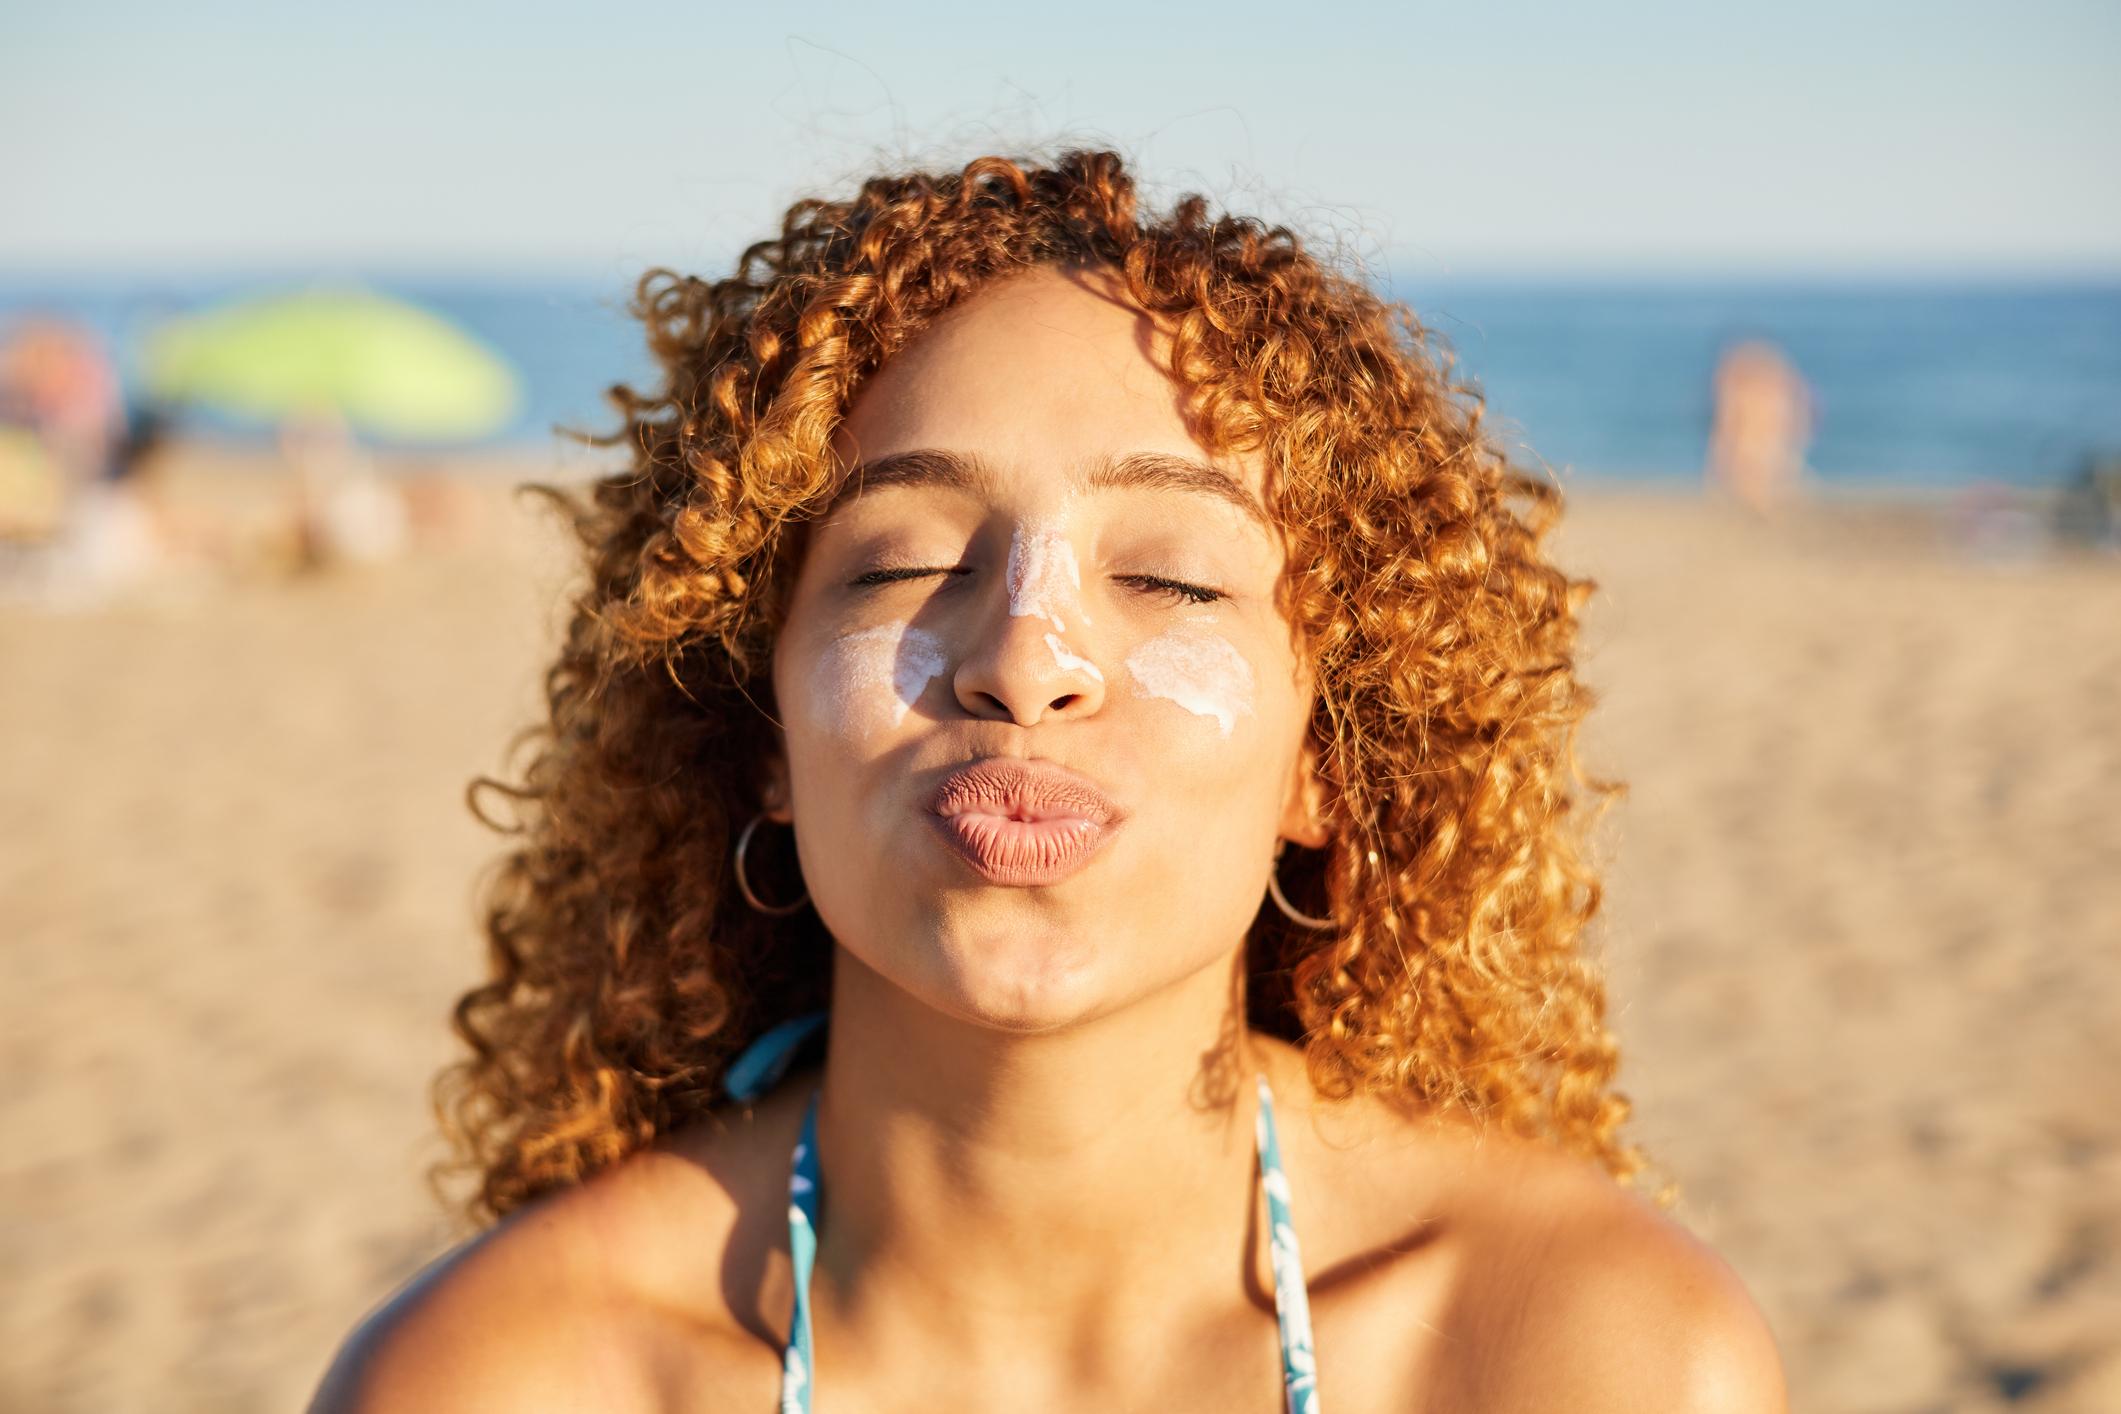  A woman with brown curly hair is sitting on a beach, she has suncream on her cheeks. She is facing the camera with her eyes closed and her lips puckered.  